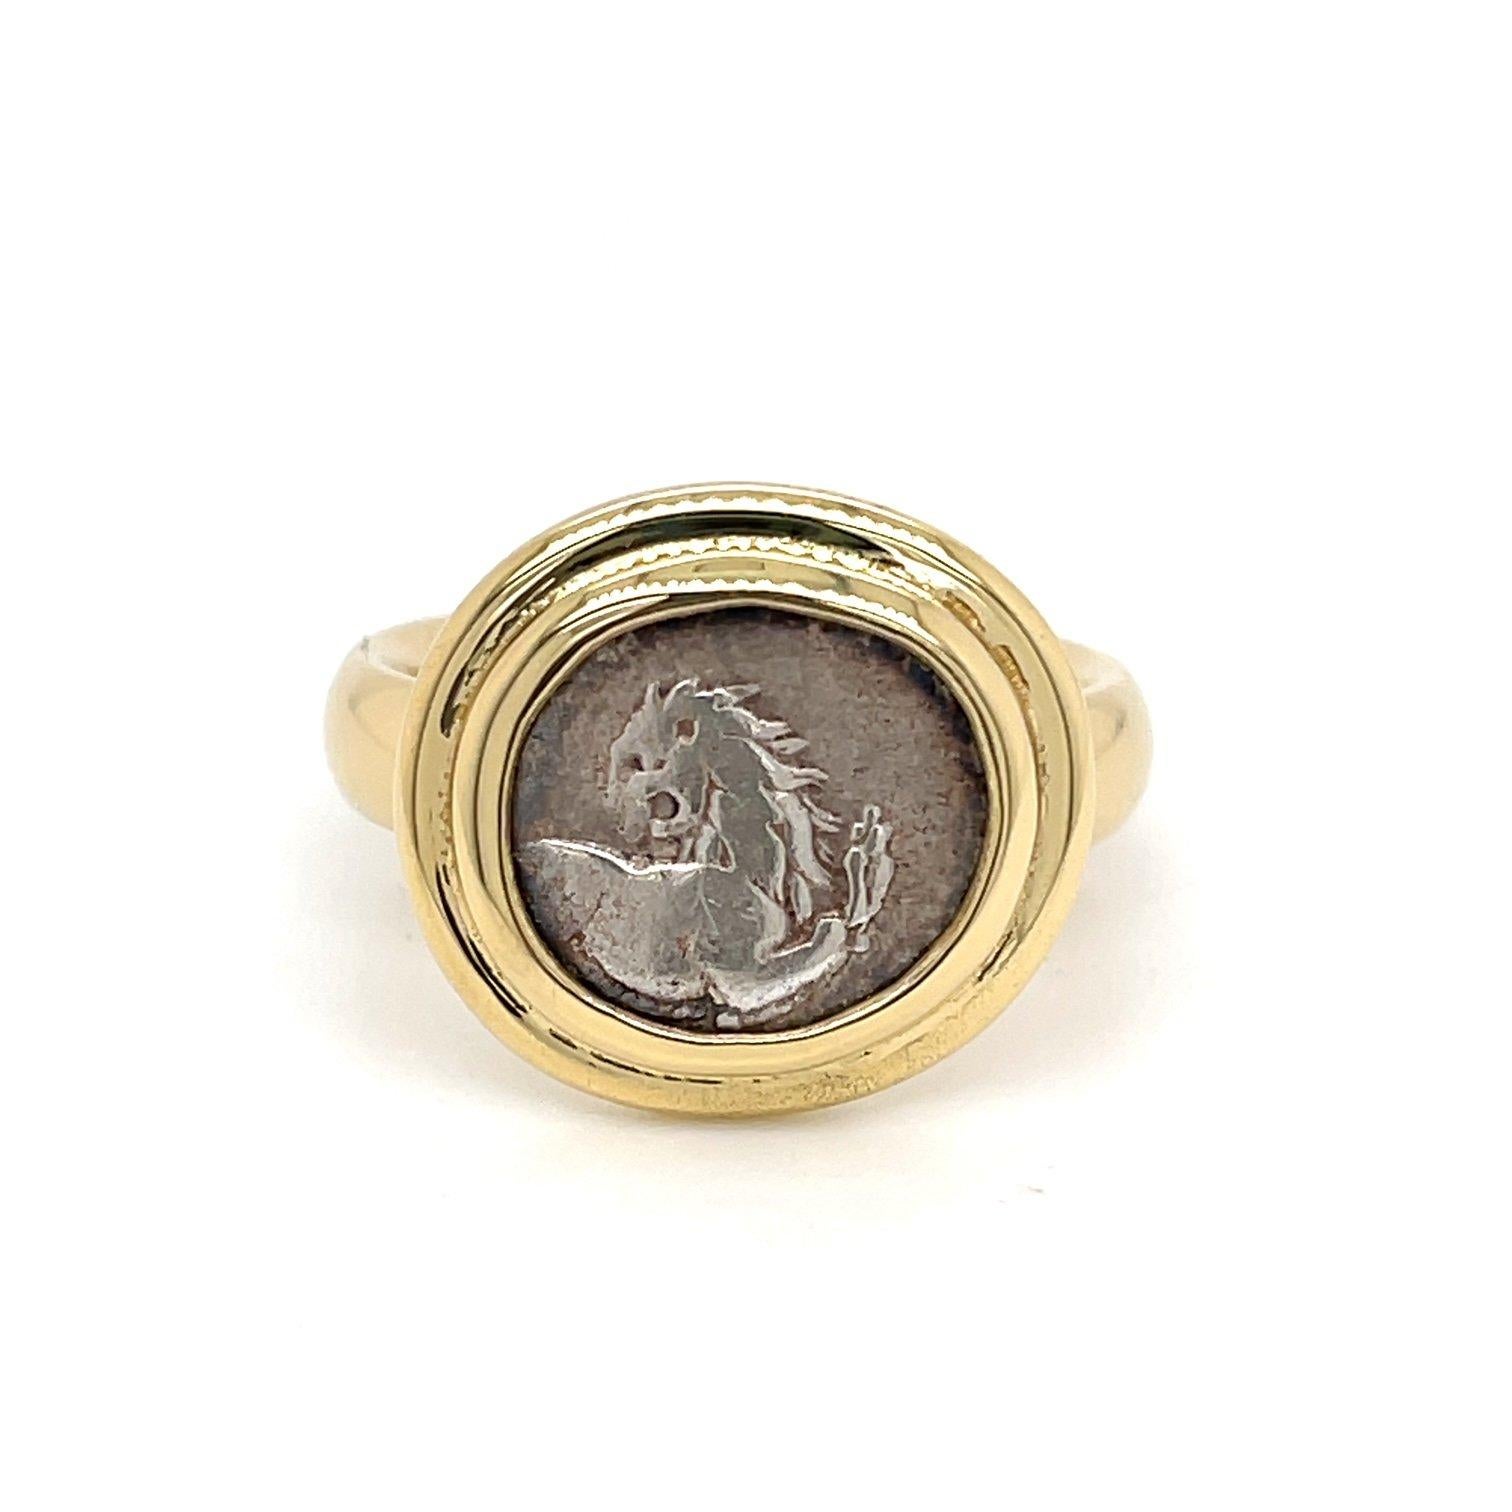 An 18k yellow gold ring set with one Greek lion coin ( Thrace, Chersonesos). Ring size 8. This ring was made an designed by llyn strong.